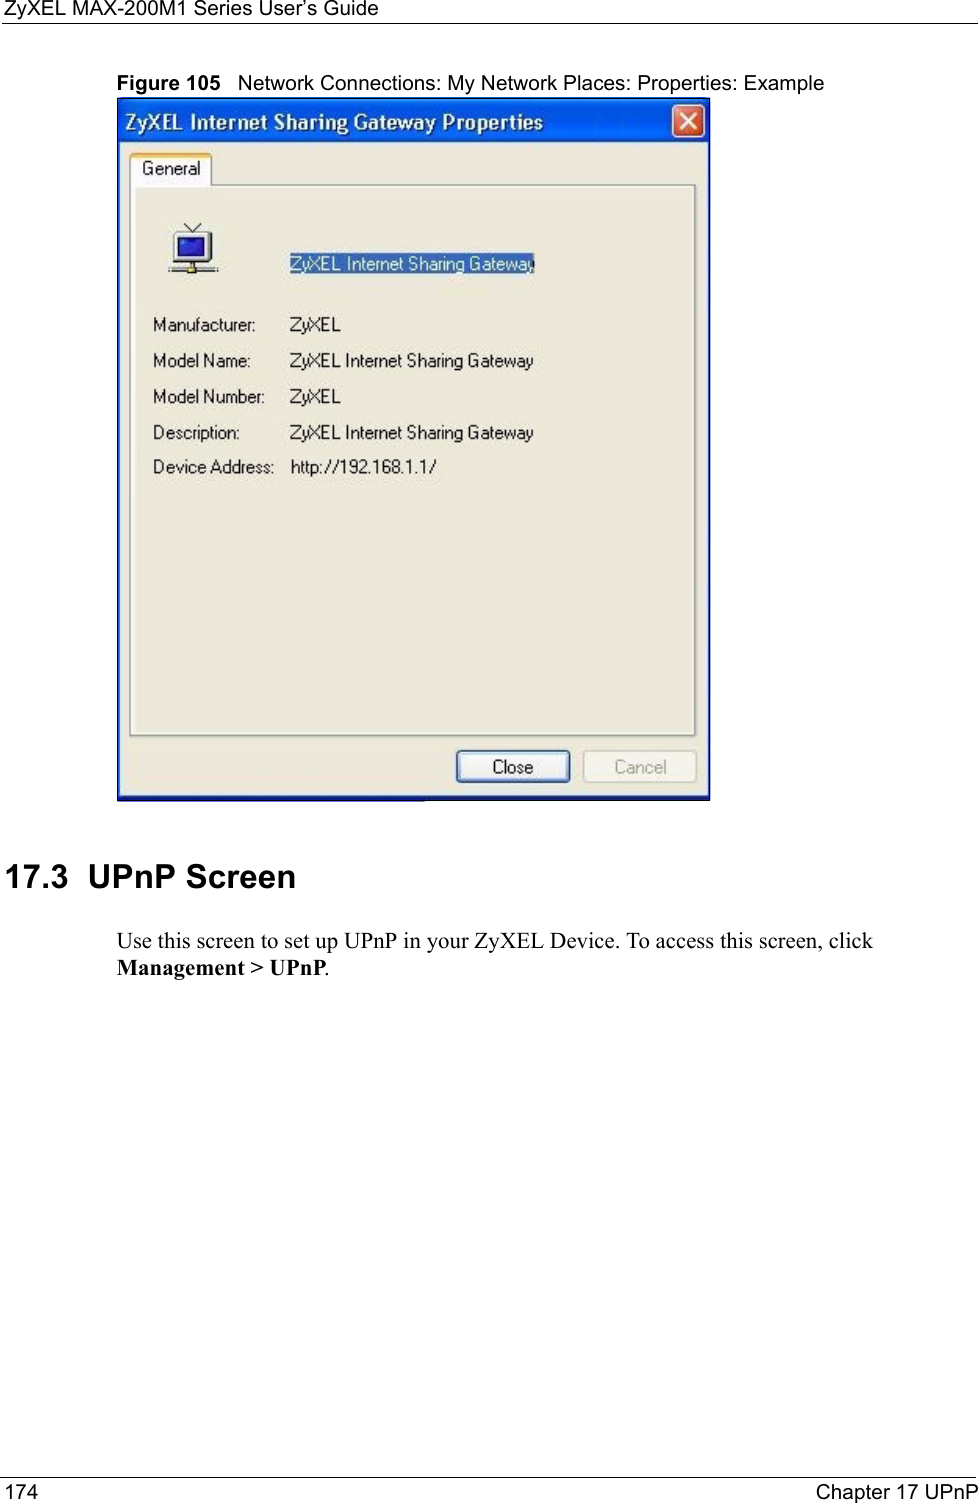 ZyXEL MAX-200M1 Series User’s Guide174 Chapter 17 UPnPFigure 105   Network Connections: My Network Places: Properties: Example17.3  UPnP ScreenUse this screen to set up UPnP in your ZyXEL Device. To access this screen, click Management &gt; UPnP.